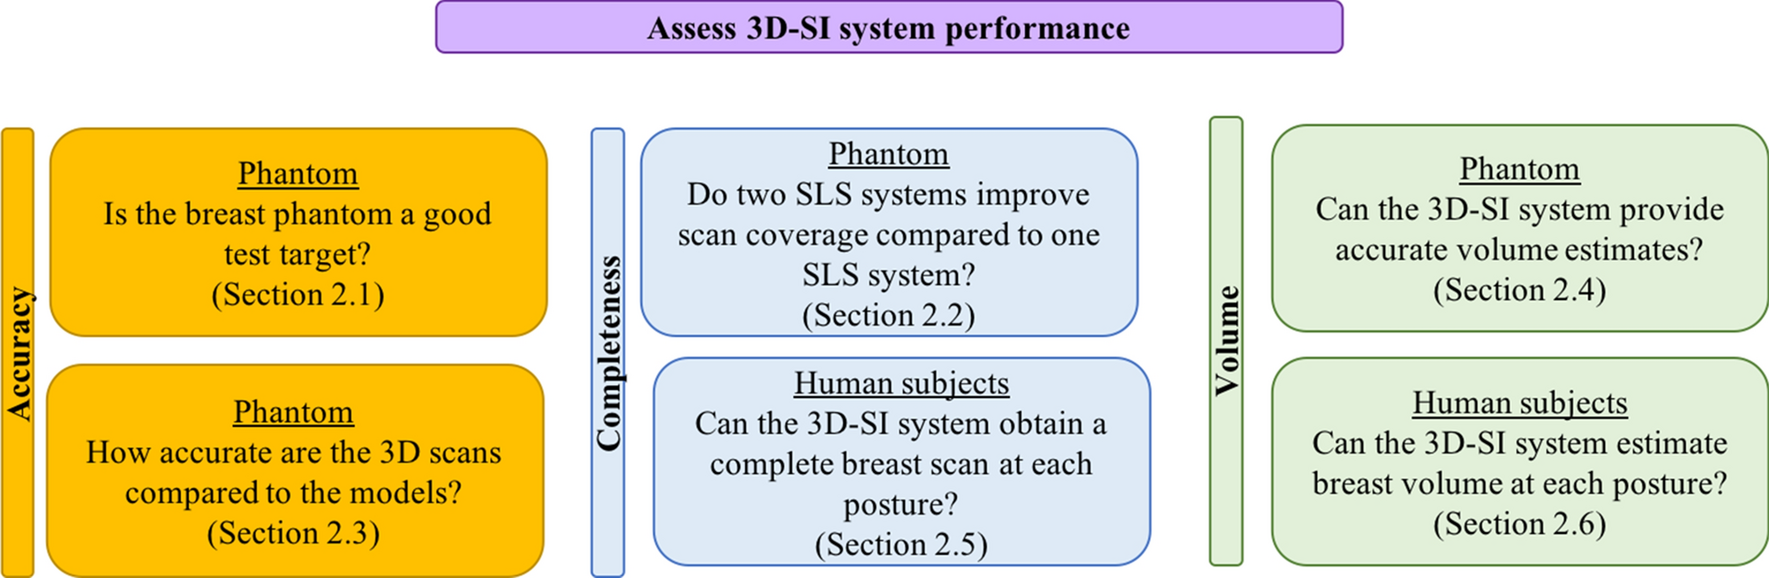 Structured-light surface scanning system to evaluate breast in standing supine positions | Scientific Reports